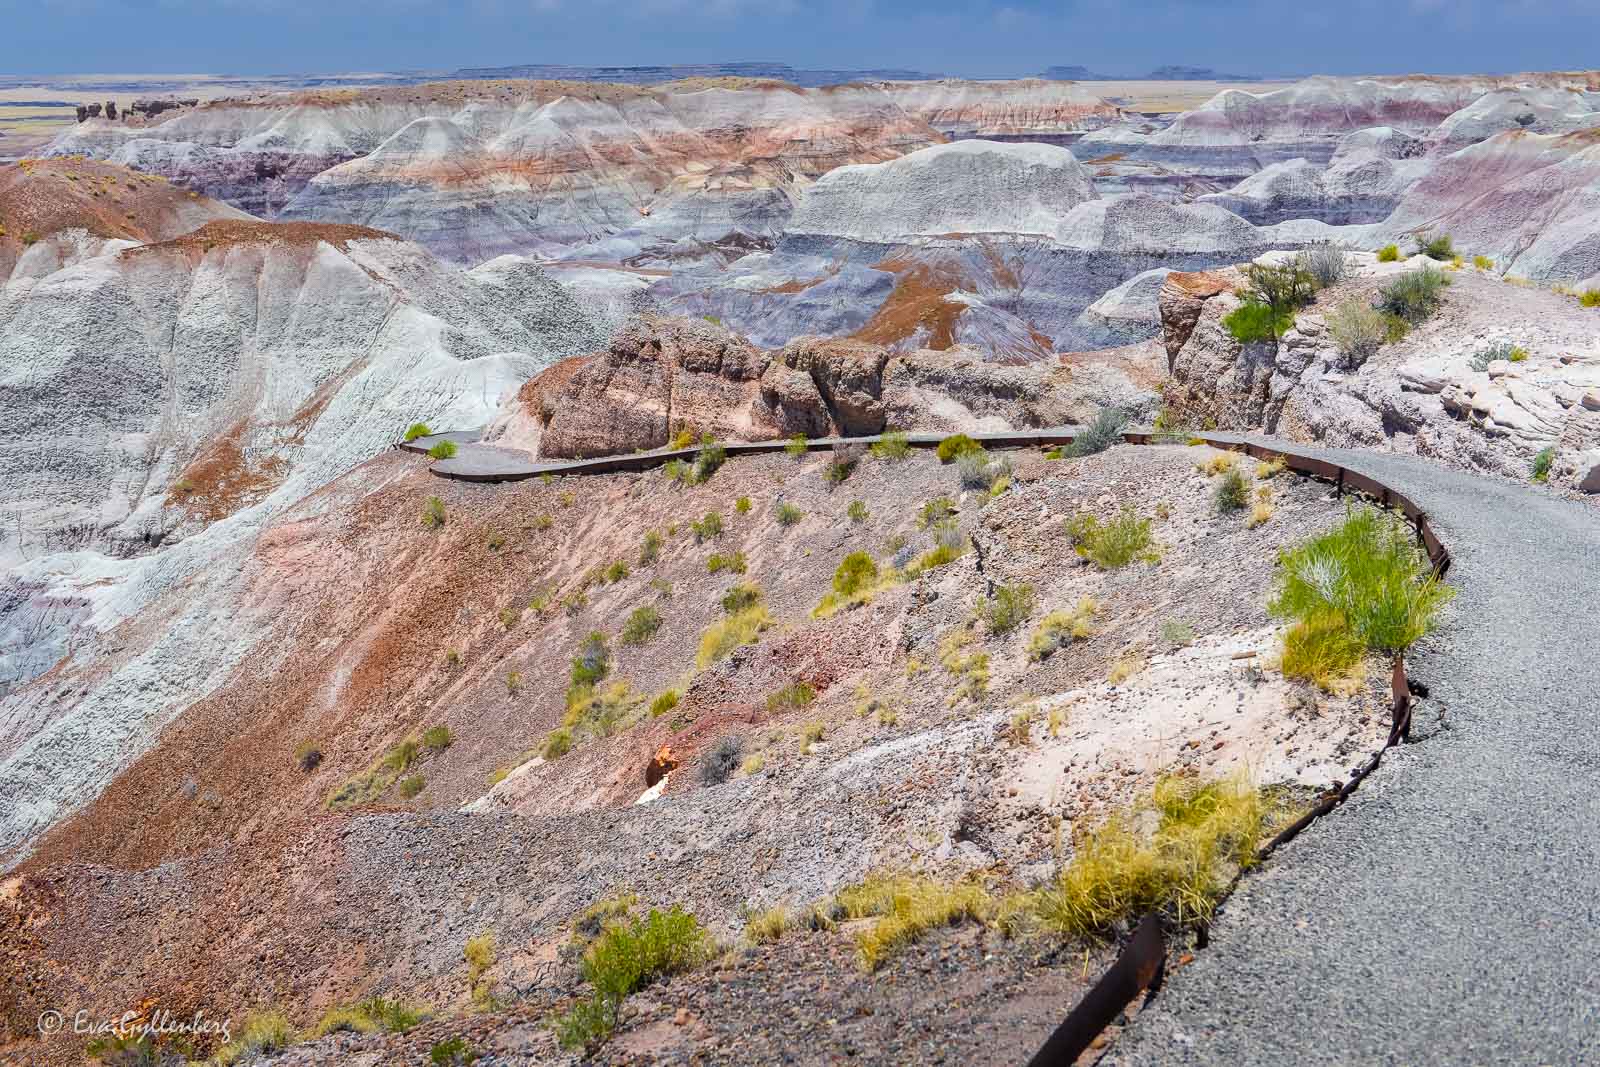 Hiking trail in the Petrified Forest